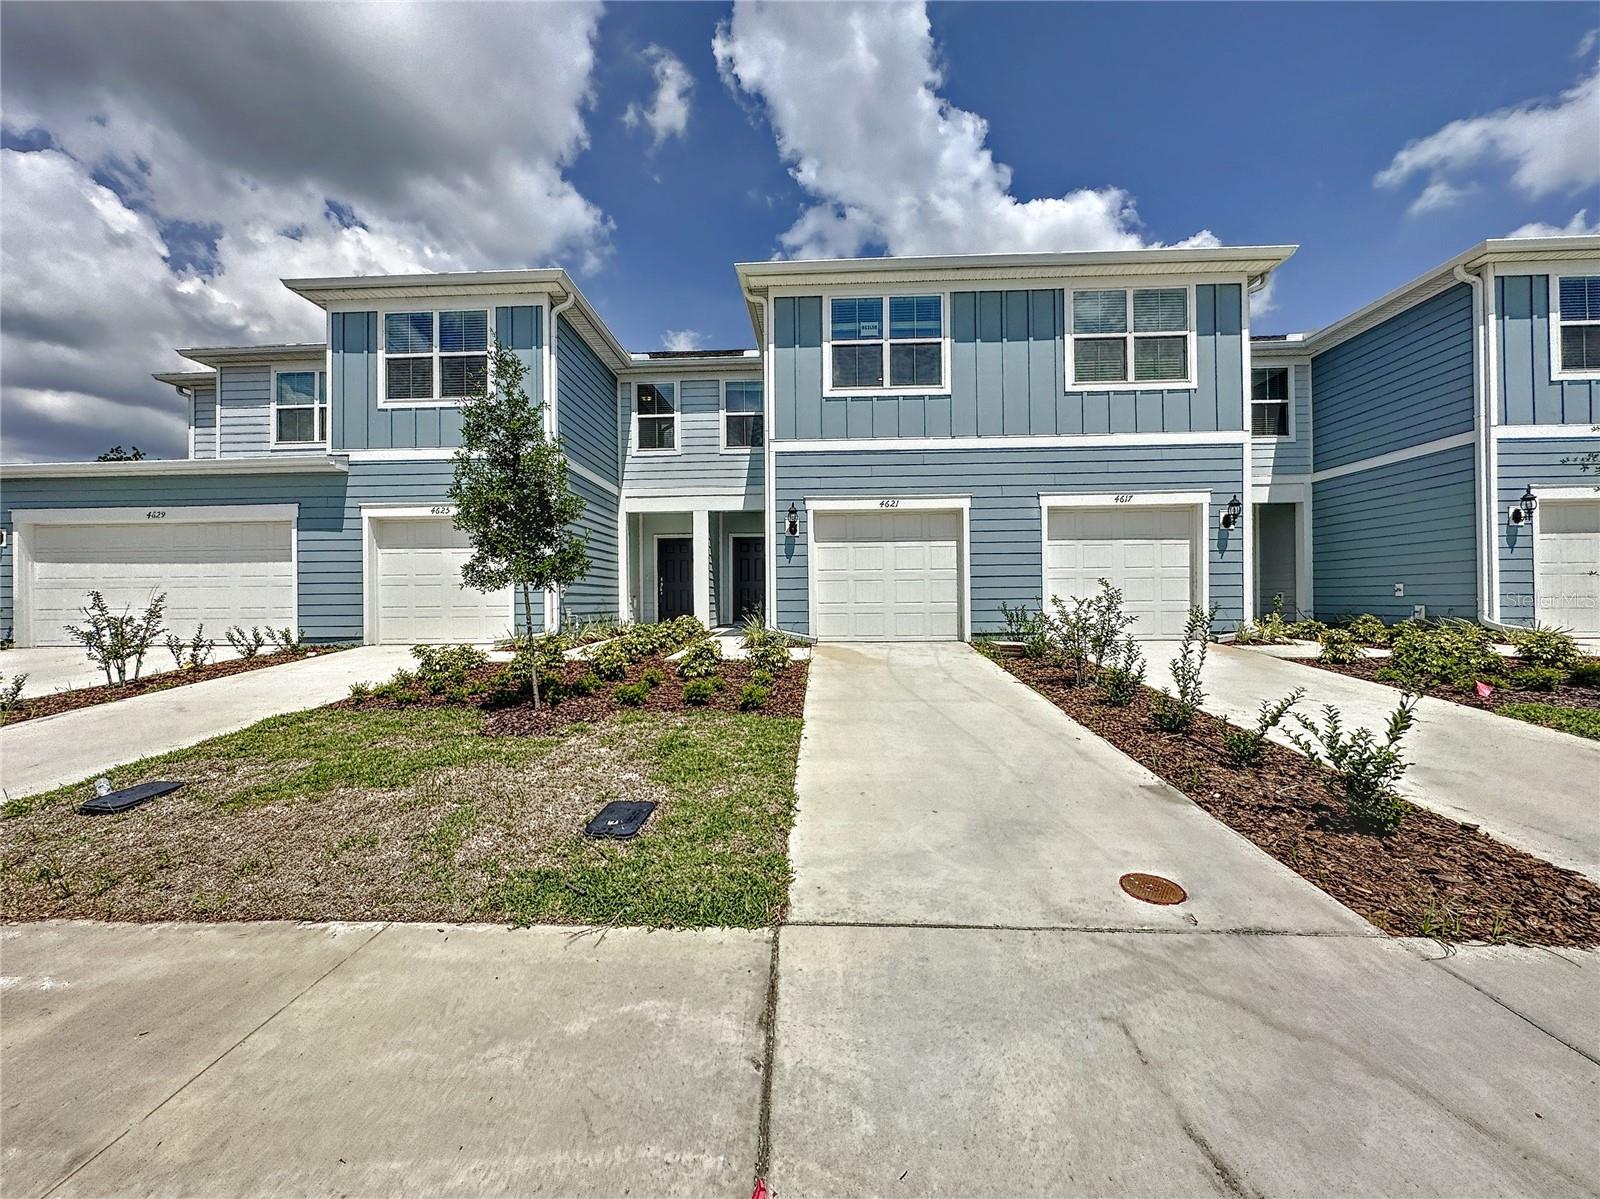 View KISSIMMEE, FL 34746 townhome